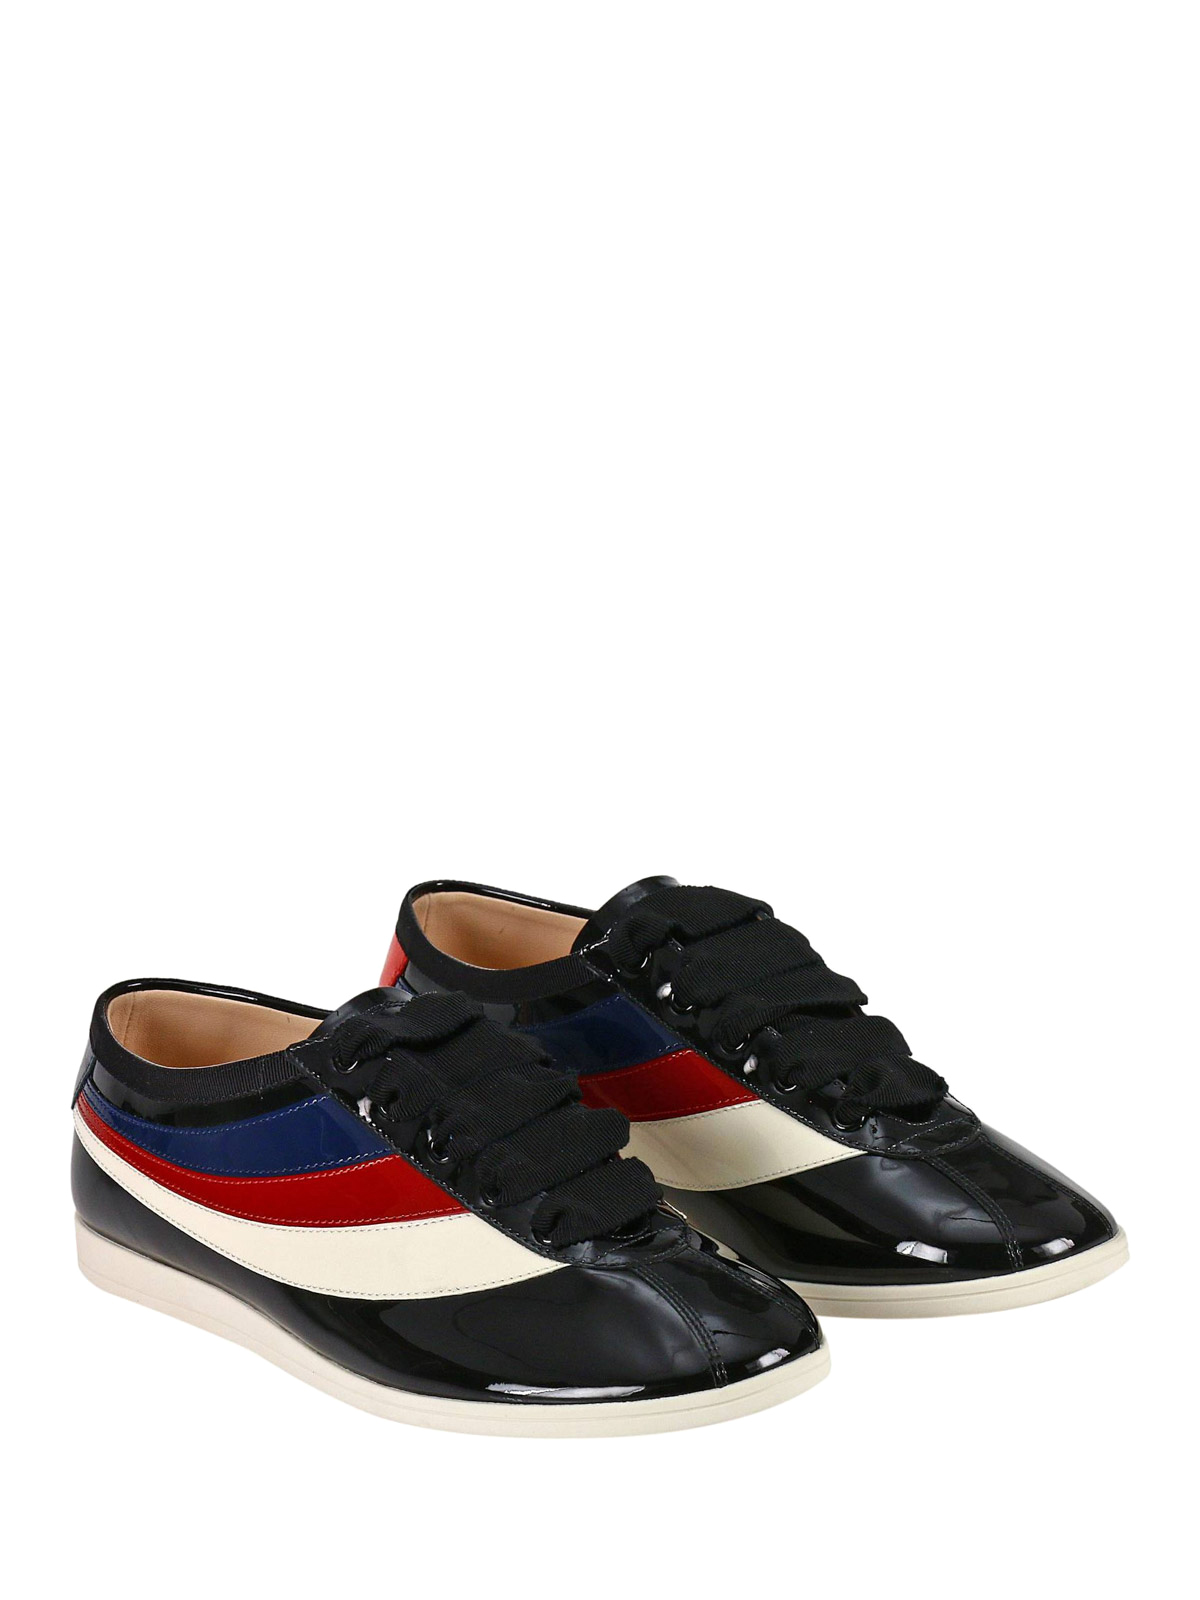 guccy falacer sneaker